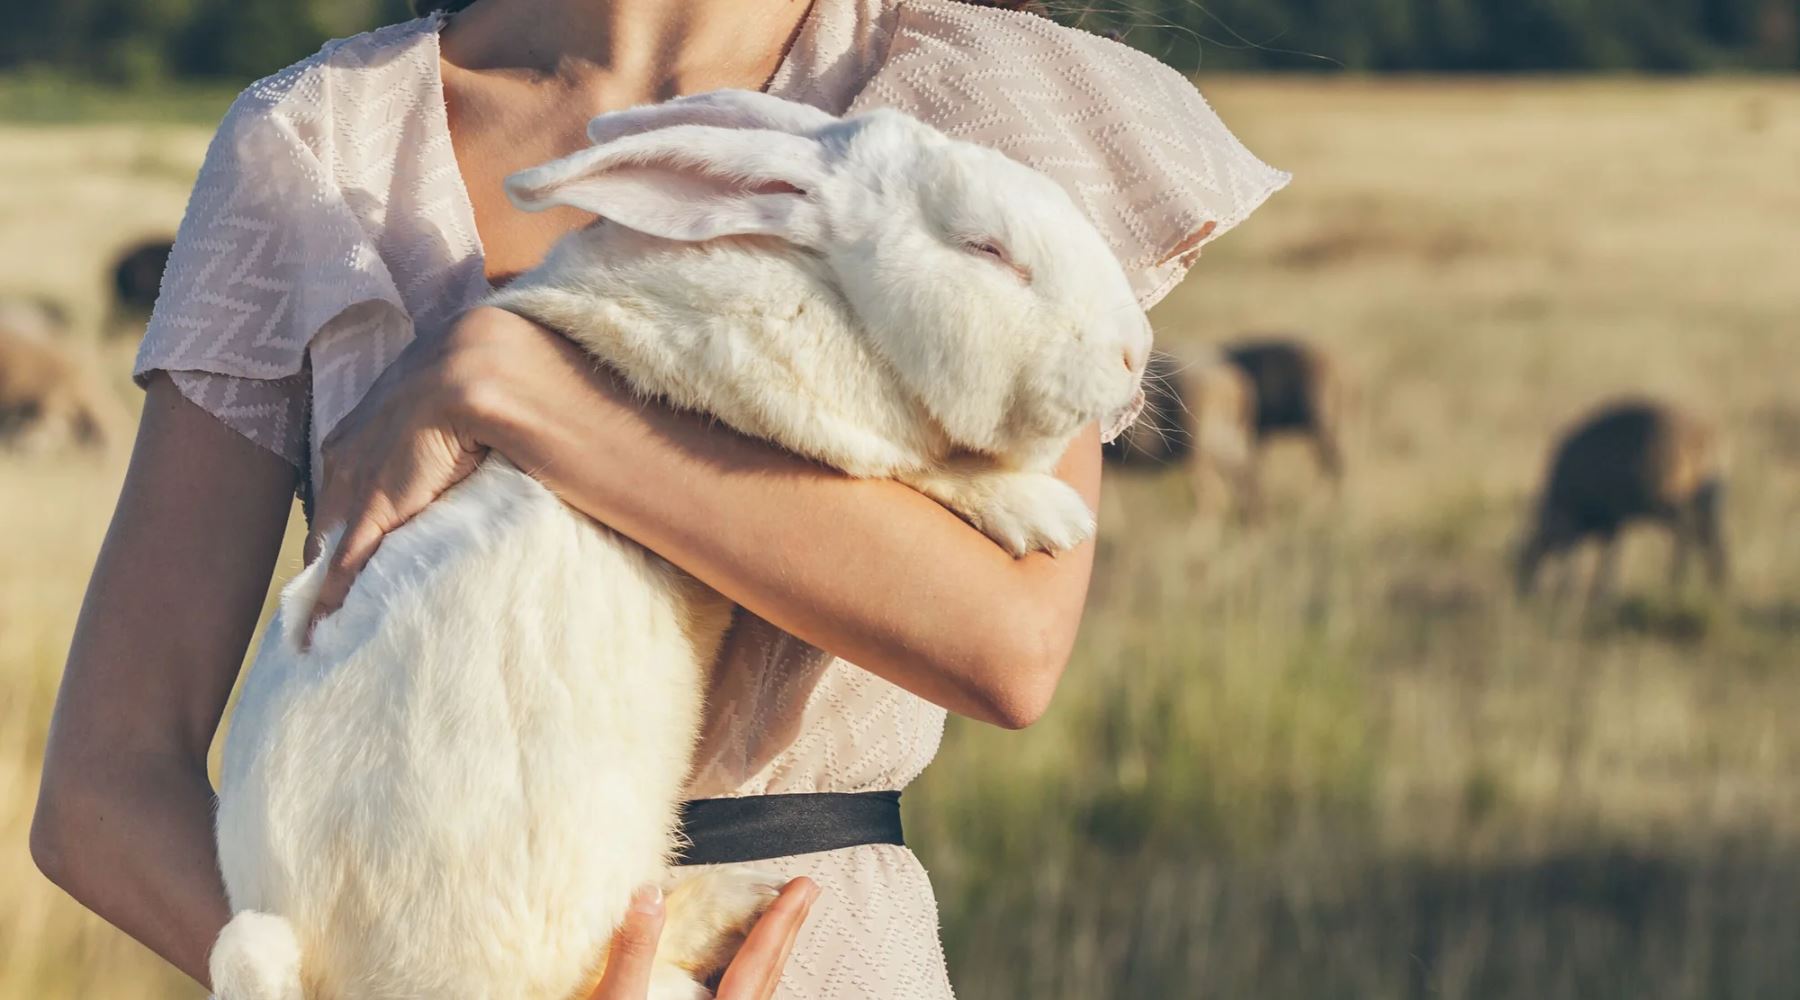 6 Tips For Switching To Cruelty-Free Skincare